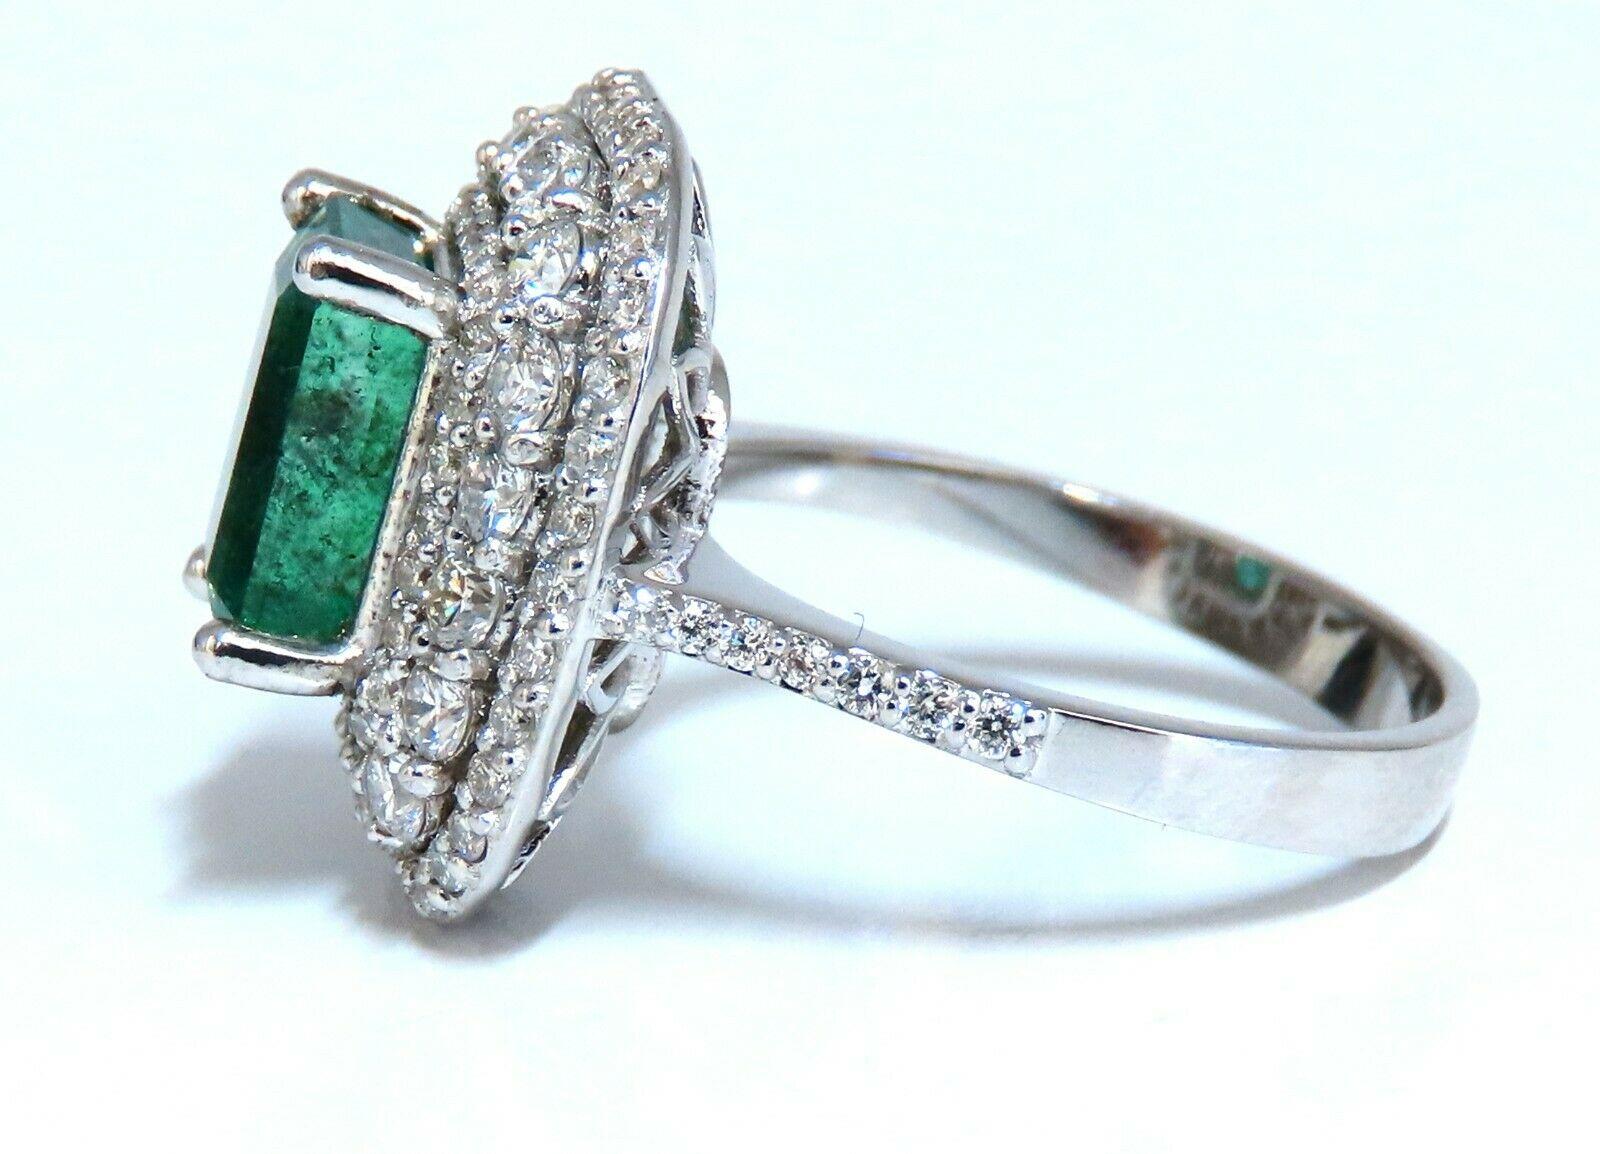 Halo Cocktail Green

2.70ct. Natural Emerald Ring

Transparent / clean clarity

Vivid Green

9.4 X 6.3mm



2.10ct. Diamonds.

Round & full cuts 

G-color Vs-2 clarity.  

14kt. white gold

5.9 grams

Ring Current size: 7

Depth of ring: 9mm

Deck